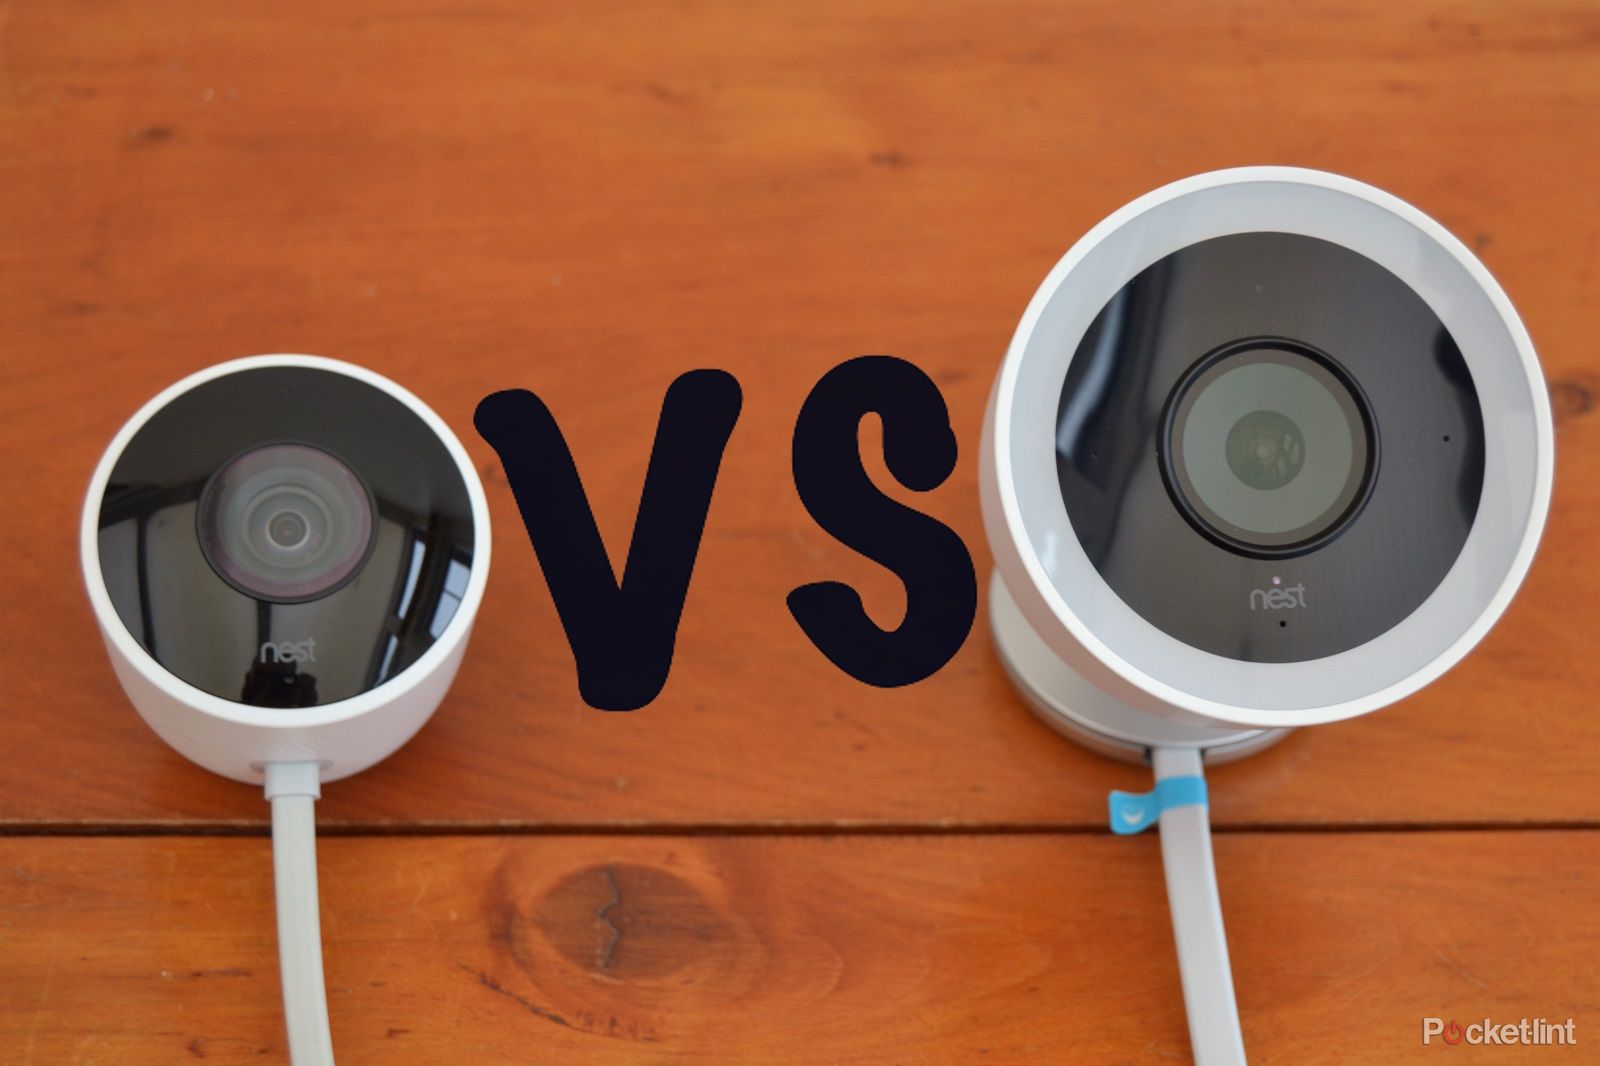 Nest Cam Iq Outdoor Vs Nest Cam Outdoor Whats The Difference image 1